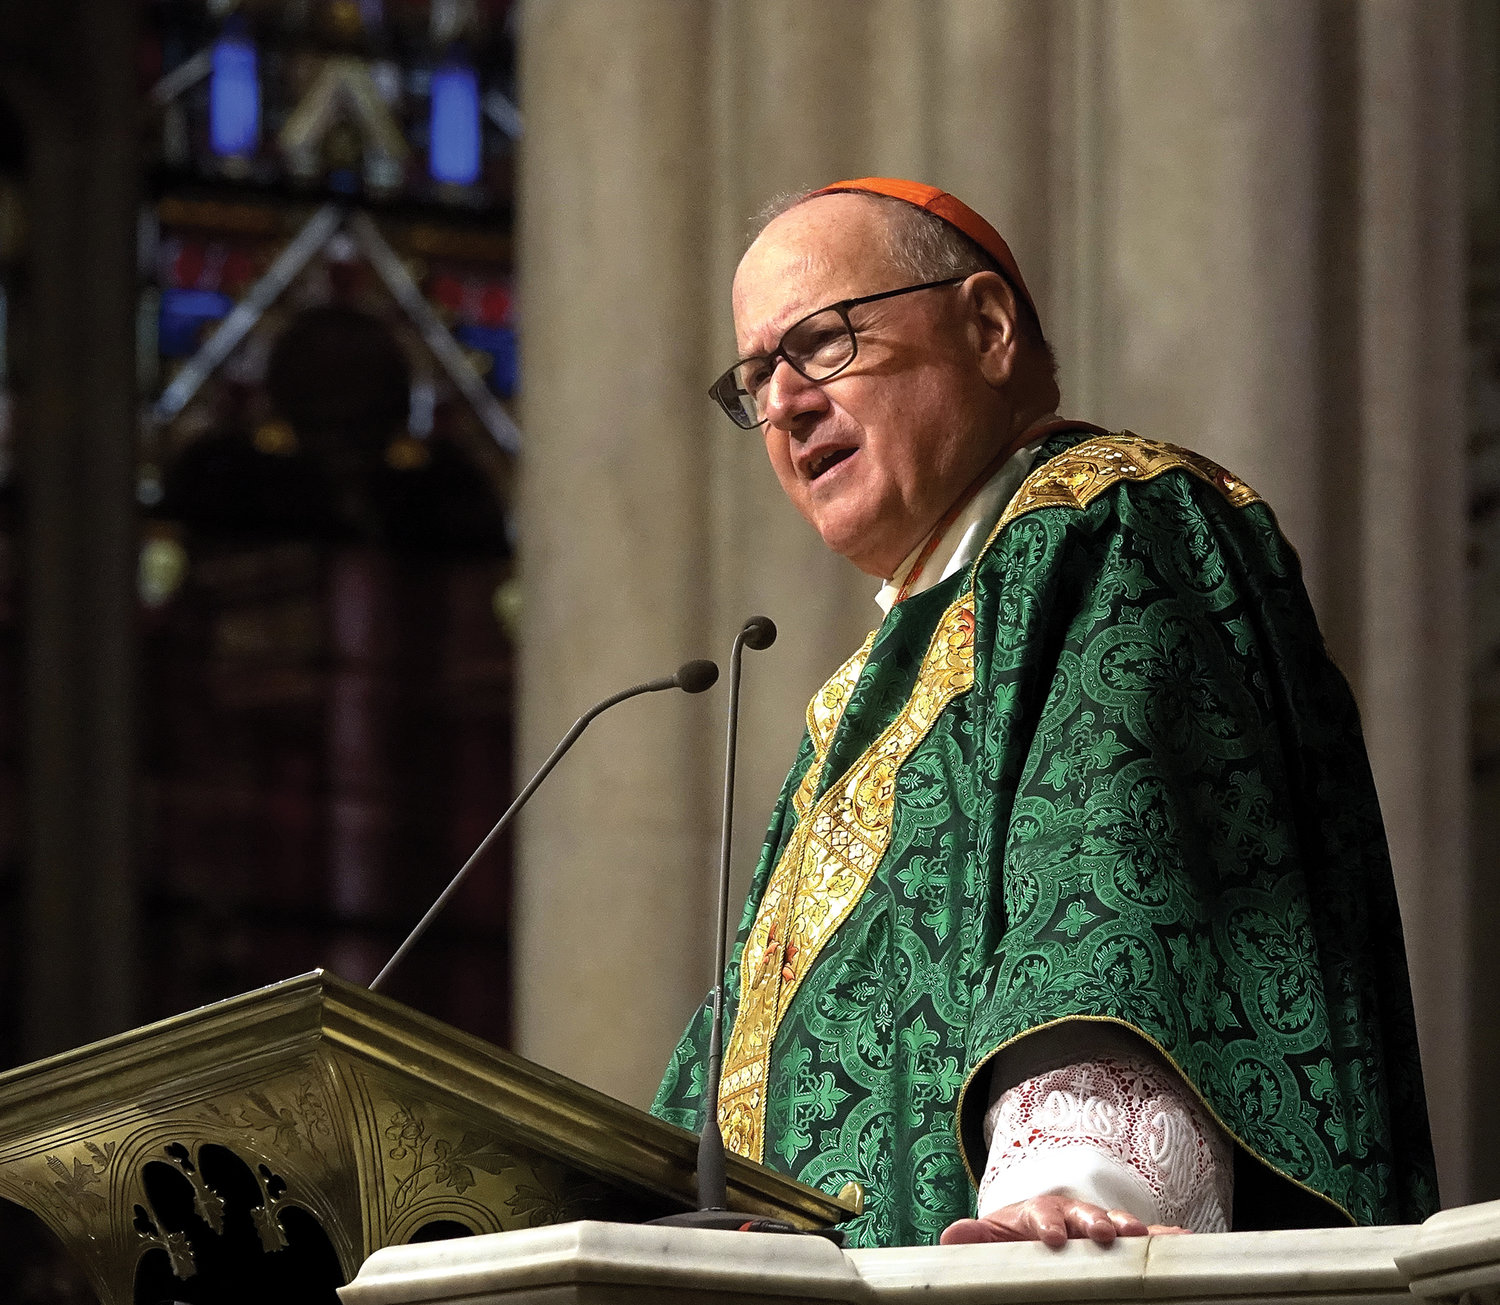 Cardinal Dolan celebrated Mass Oct. 17 at St. Patrick’s Cathedral. The occasion opened the Archdiocese of New York’s diocesan phase of a synod, beginning “preparation and prayer,” at the request of Pope Francis, in anticipation of the Synod of Bishops in Rome in October 2023.